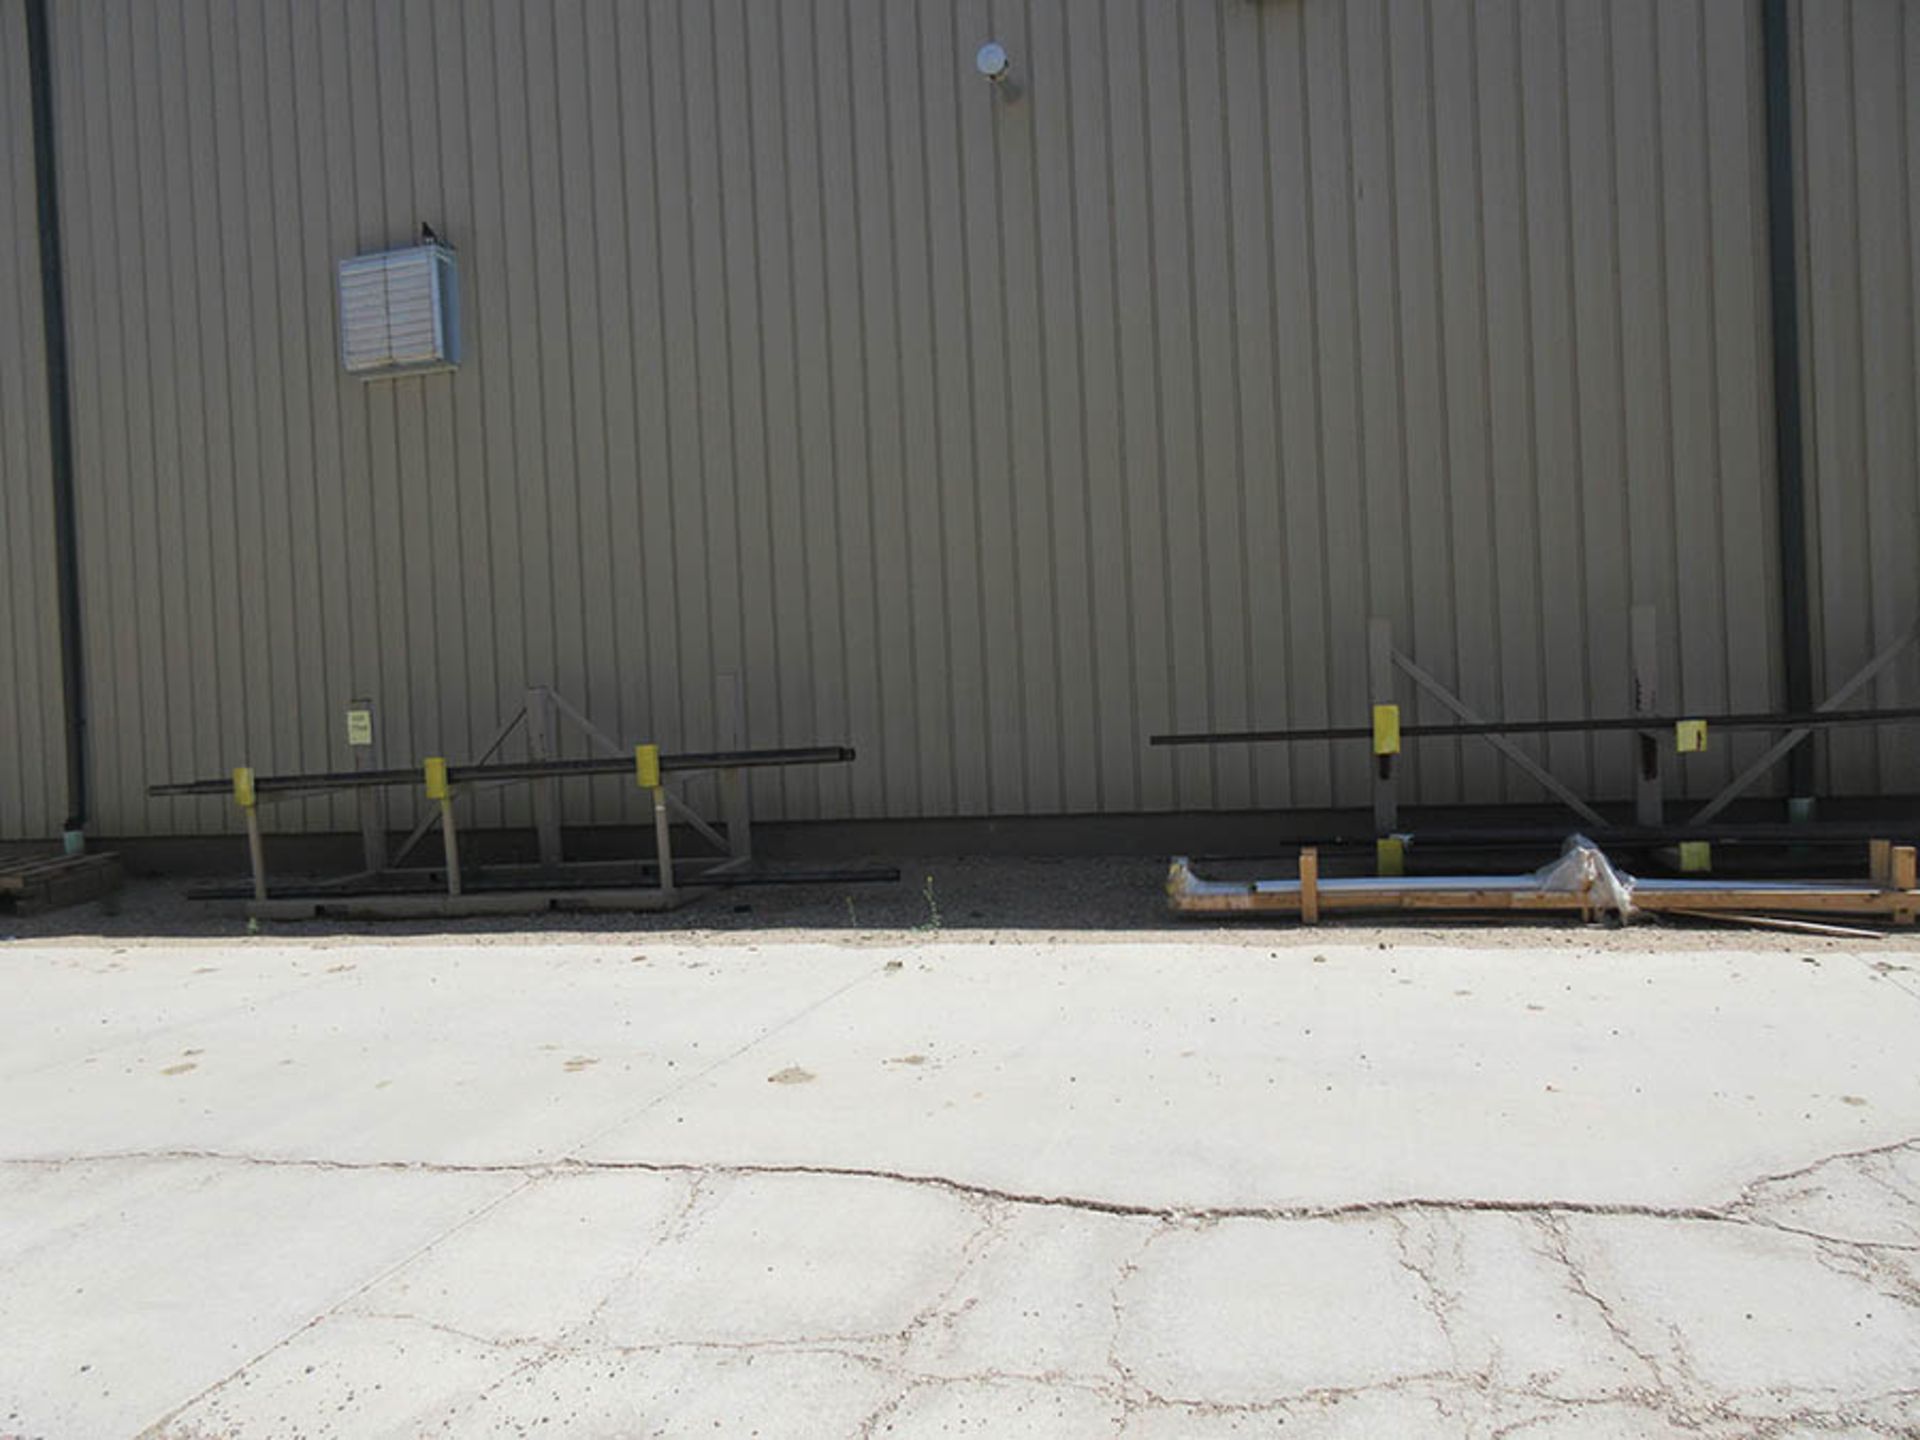 LOT ASST'D METALS, SKIDS, PIPES, PLATES, SEPARATOR HOUSING PARTS, AND PIPE RACKS, (IN YARD) - Image 2 of 8